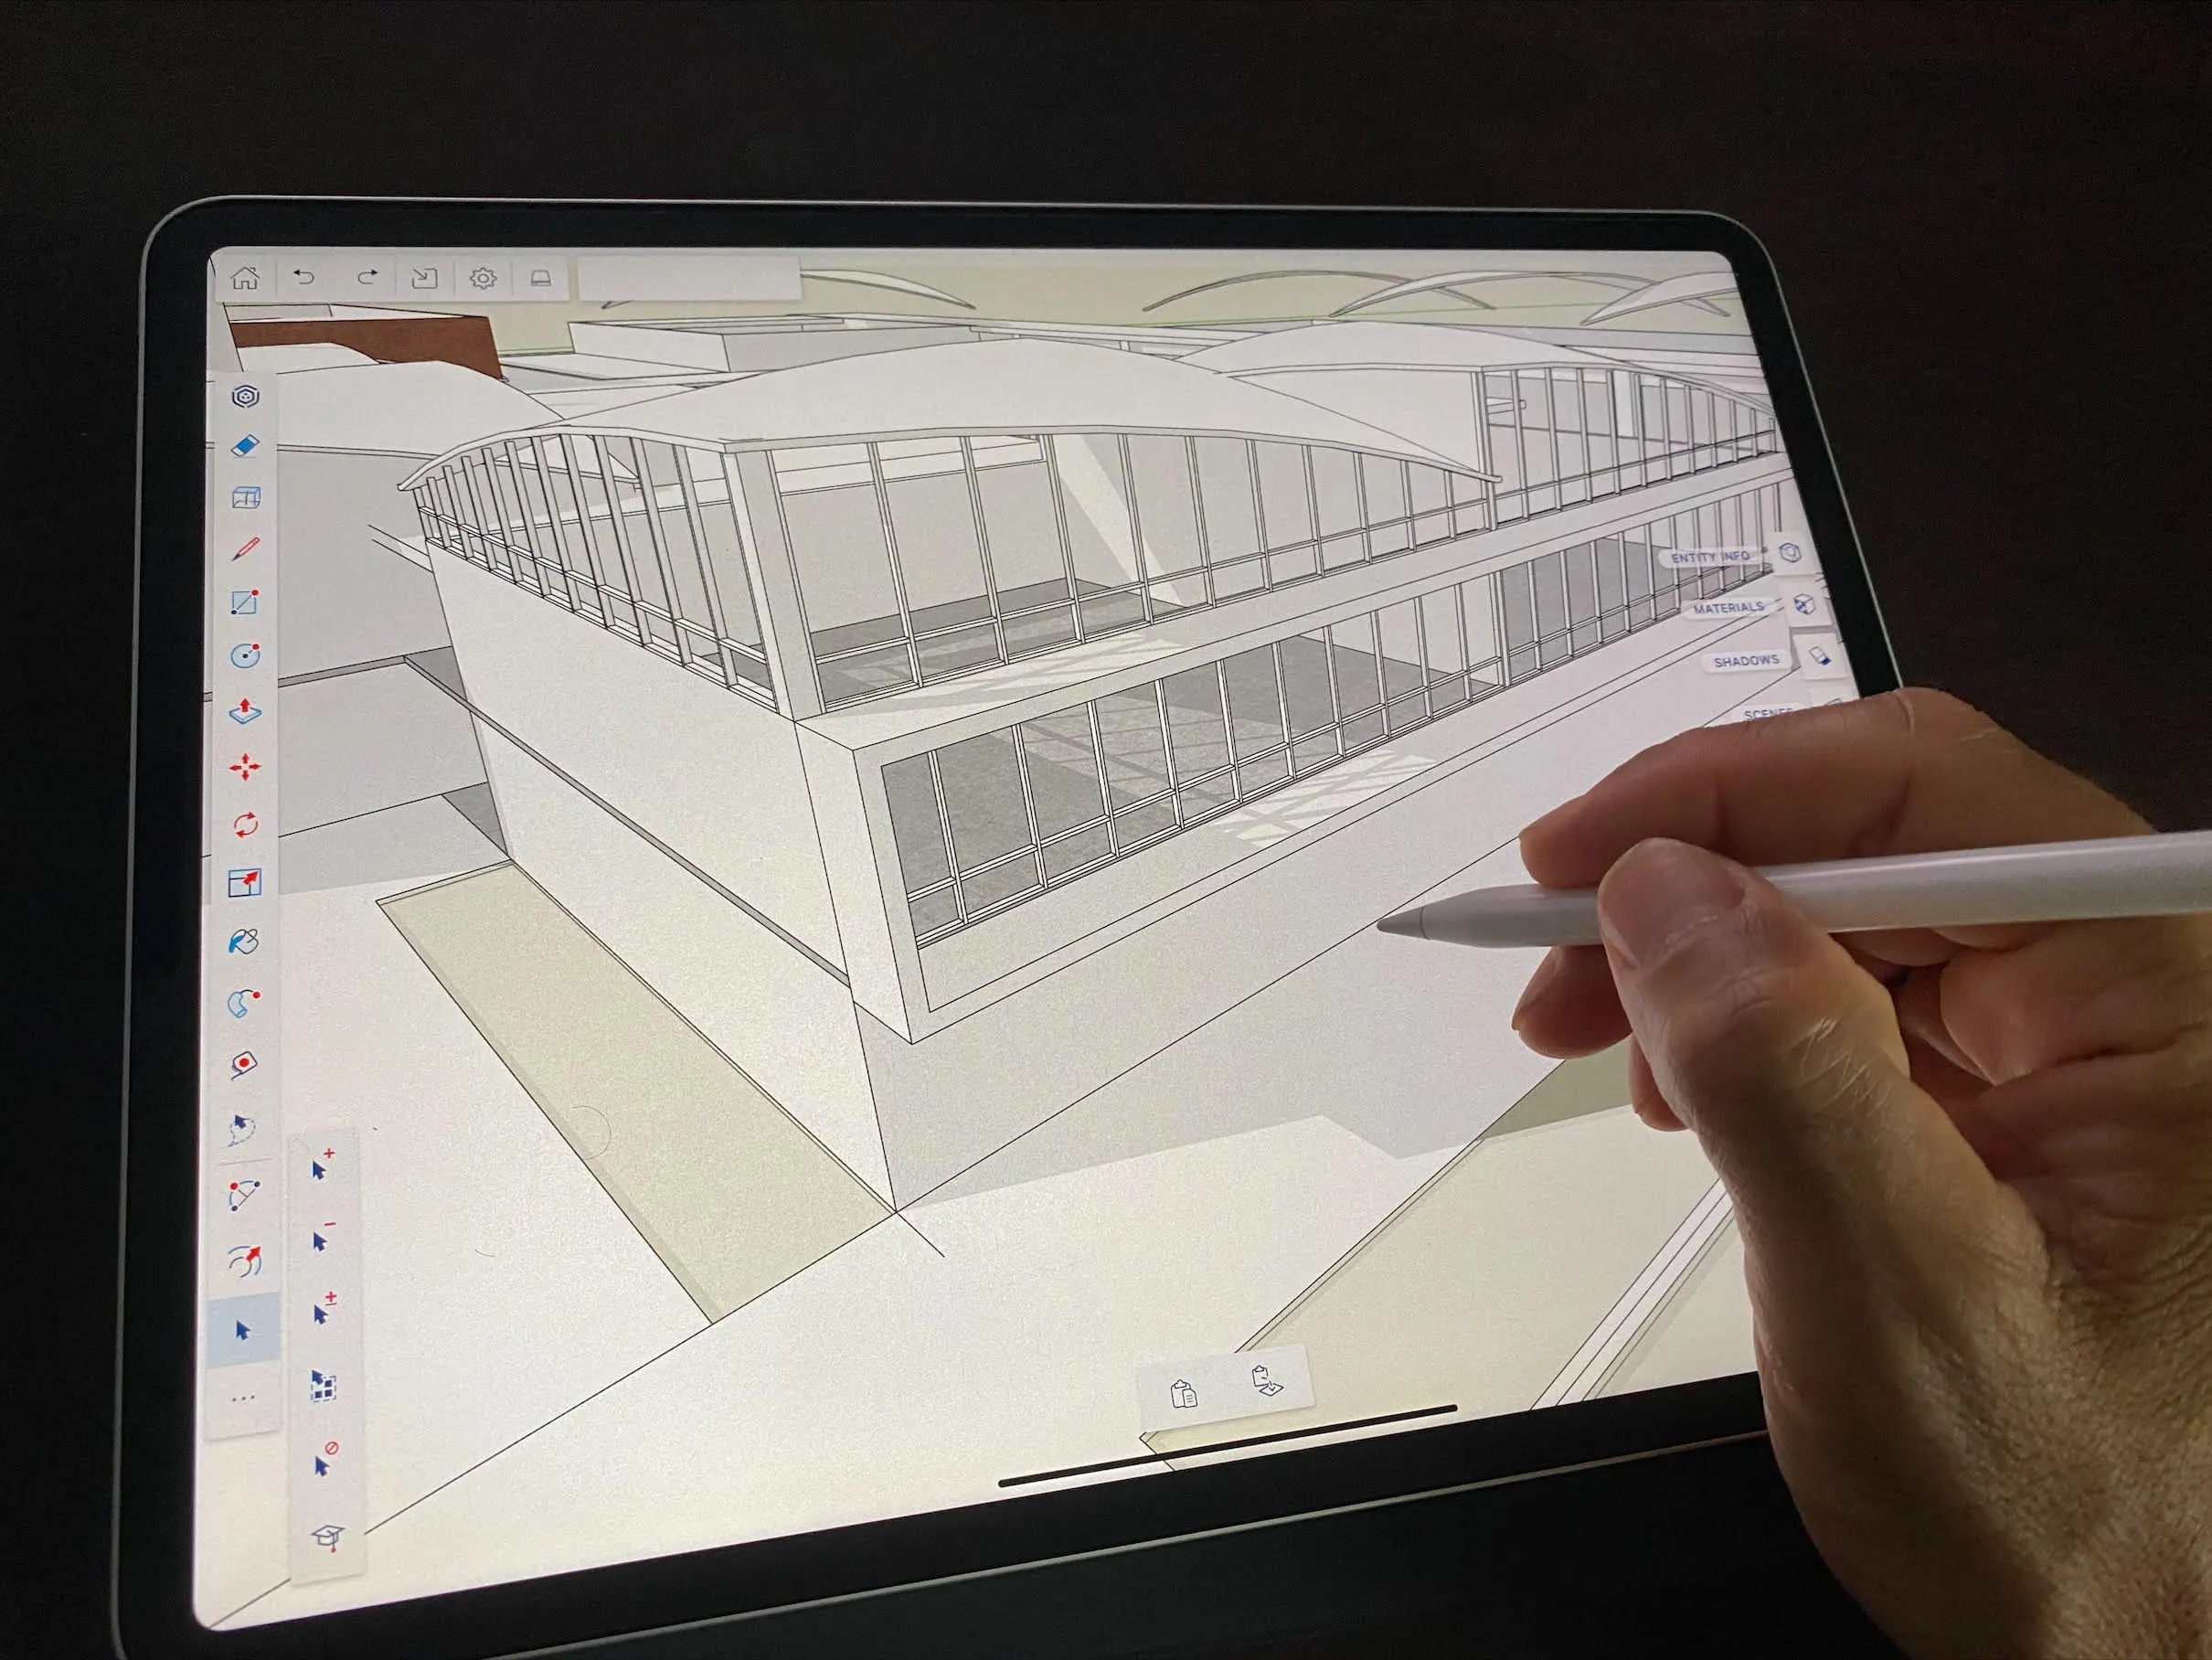 SketchUp for iPad work. Image courtesy of Perkins Eastman.